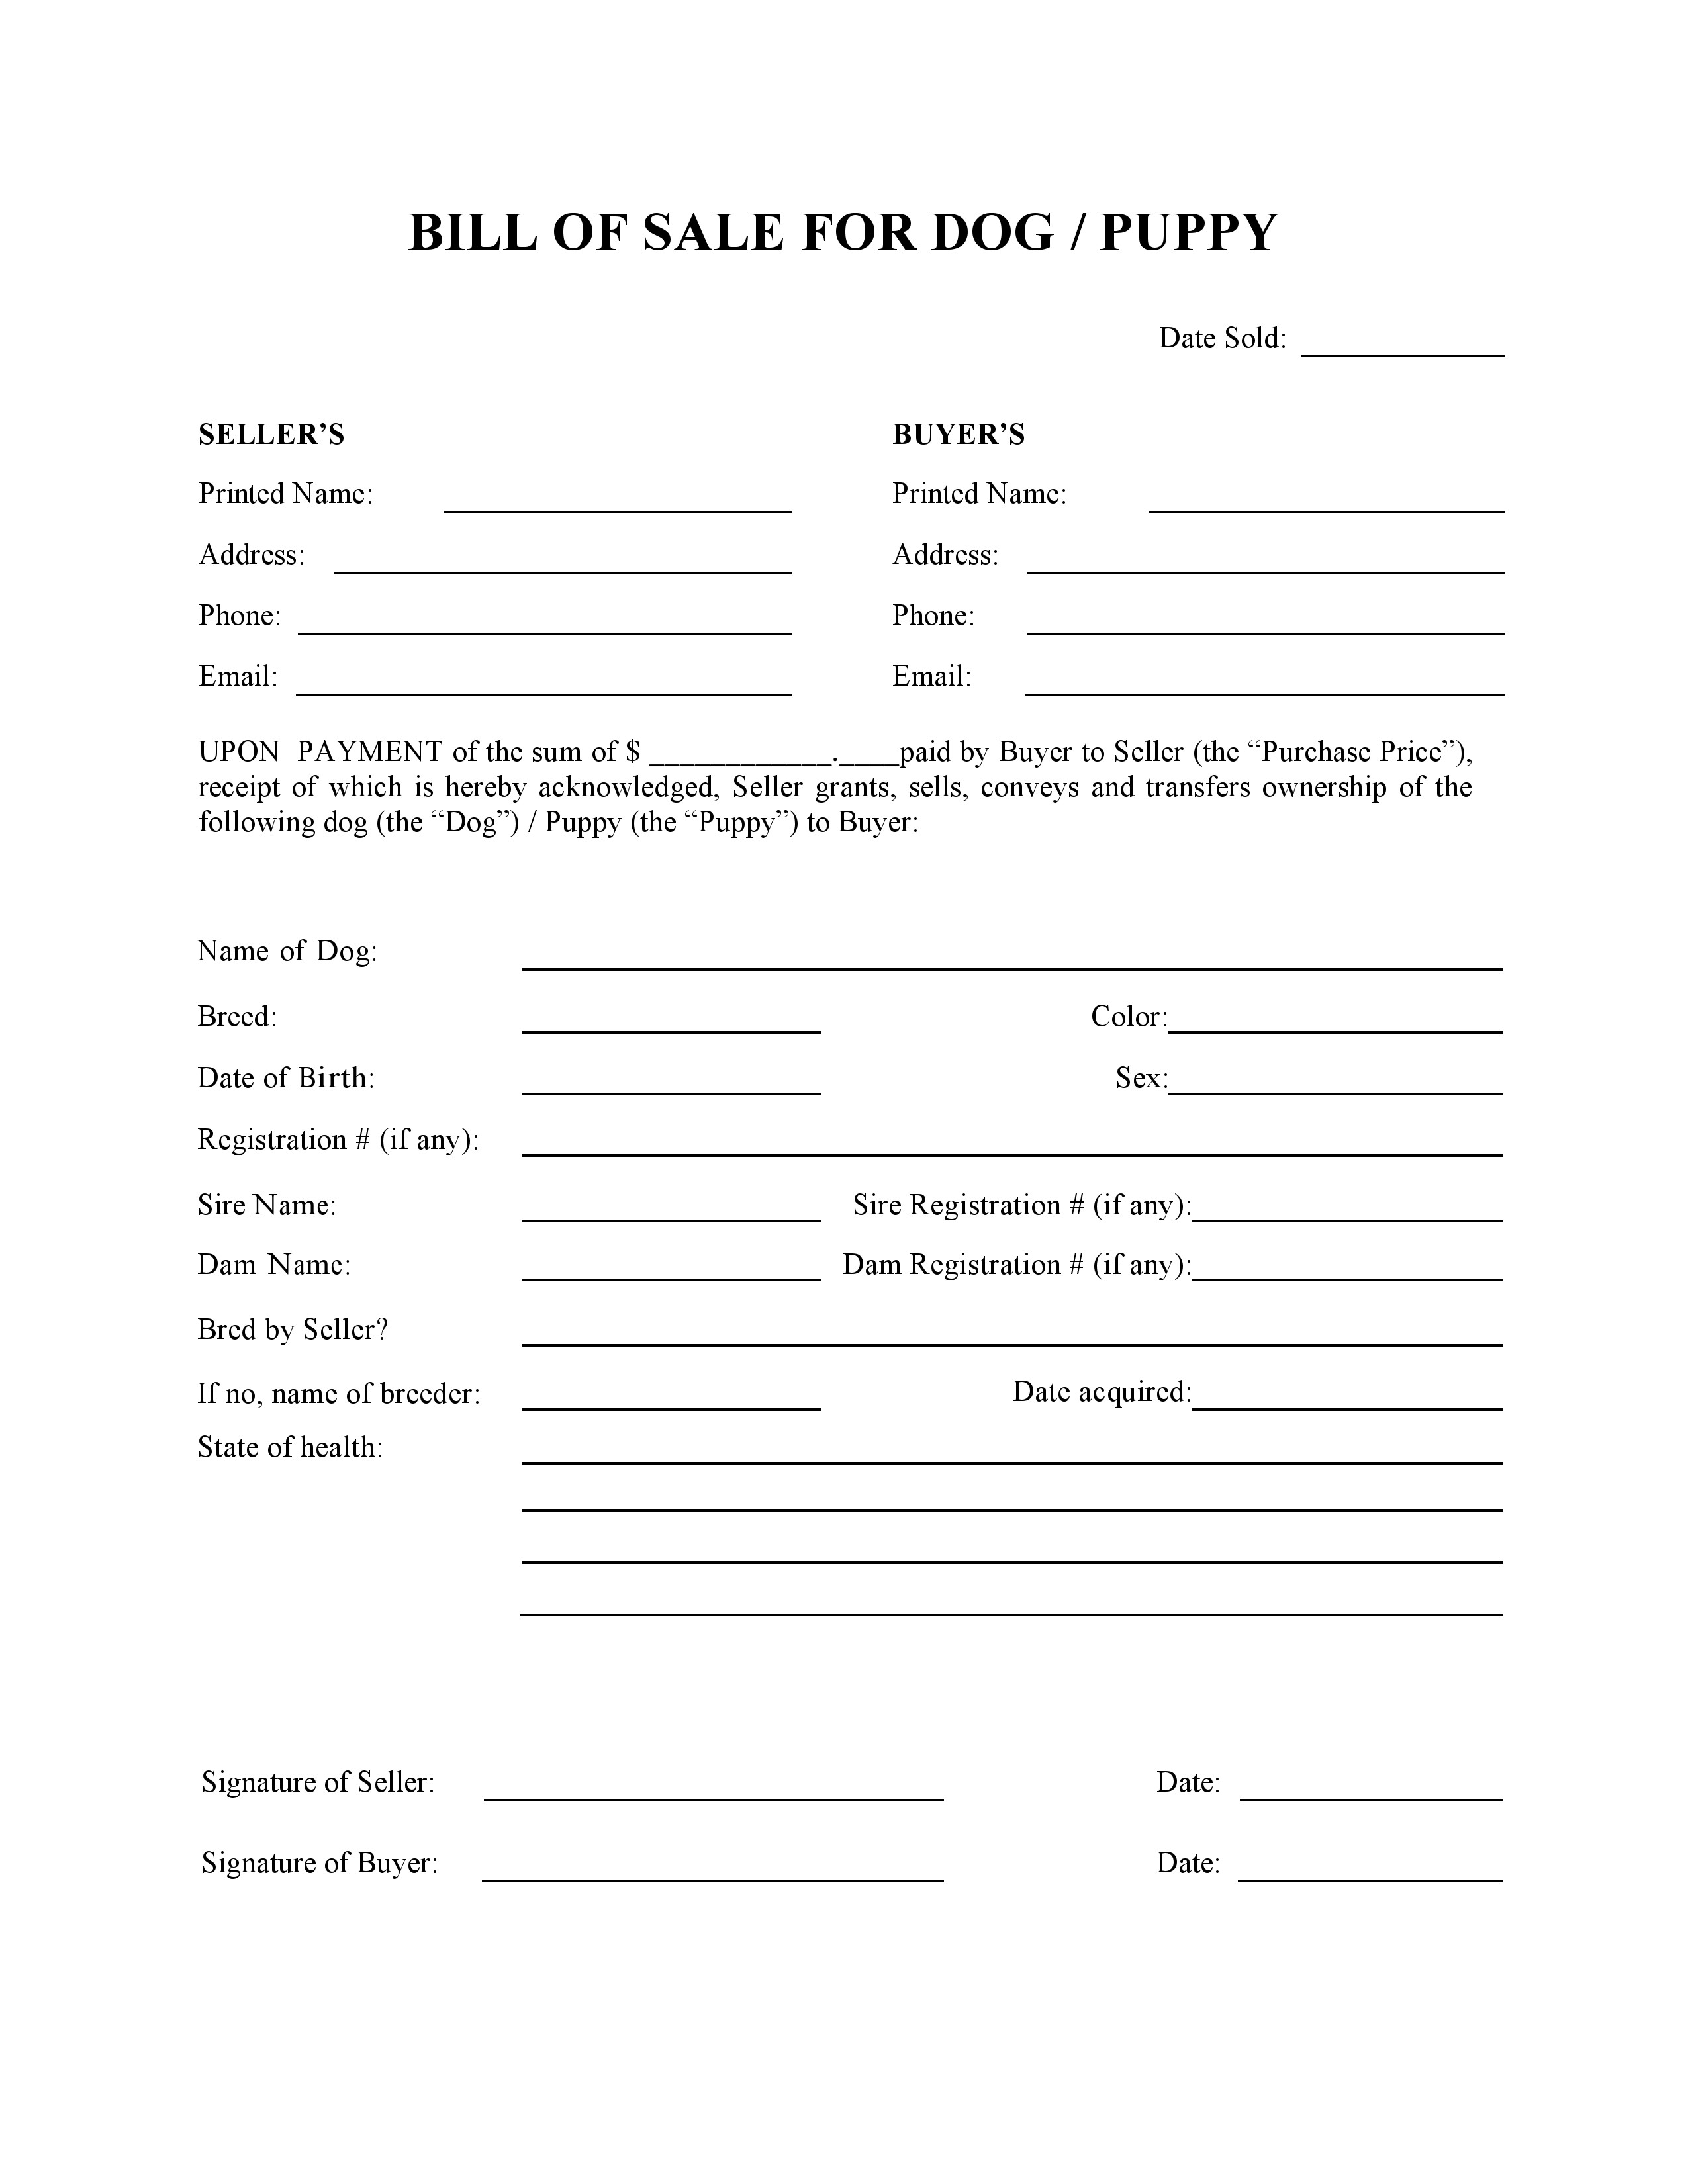 Free Dog or Puppy Bill of Sale Form PDF DOCX